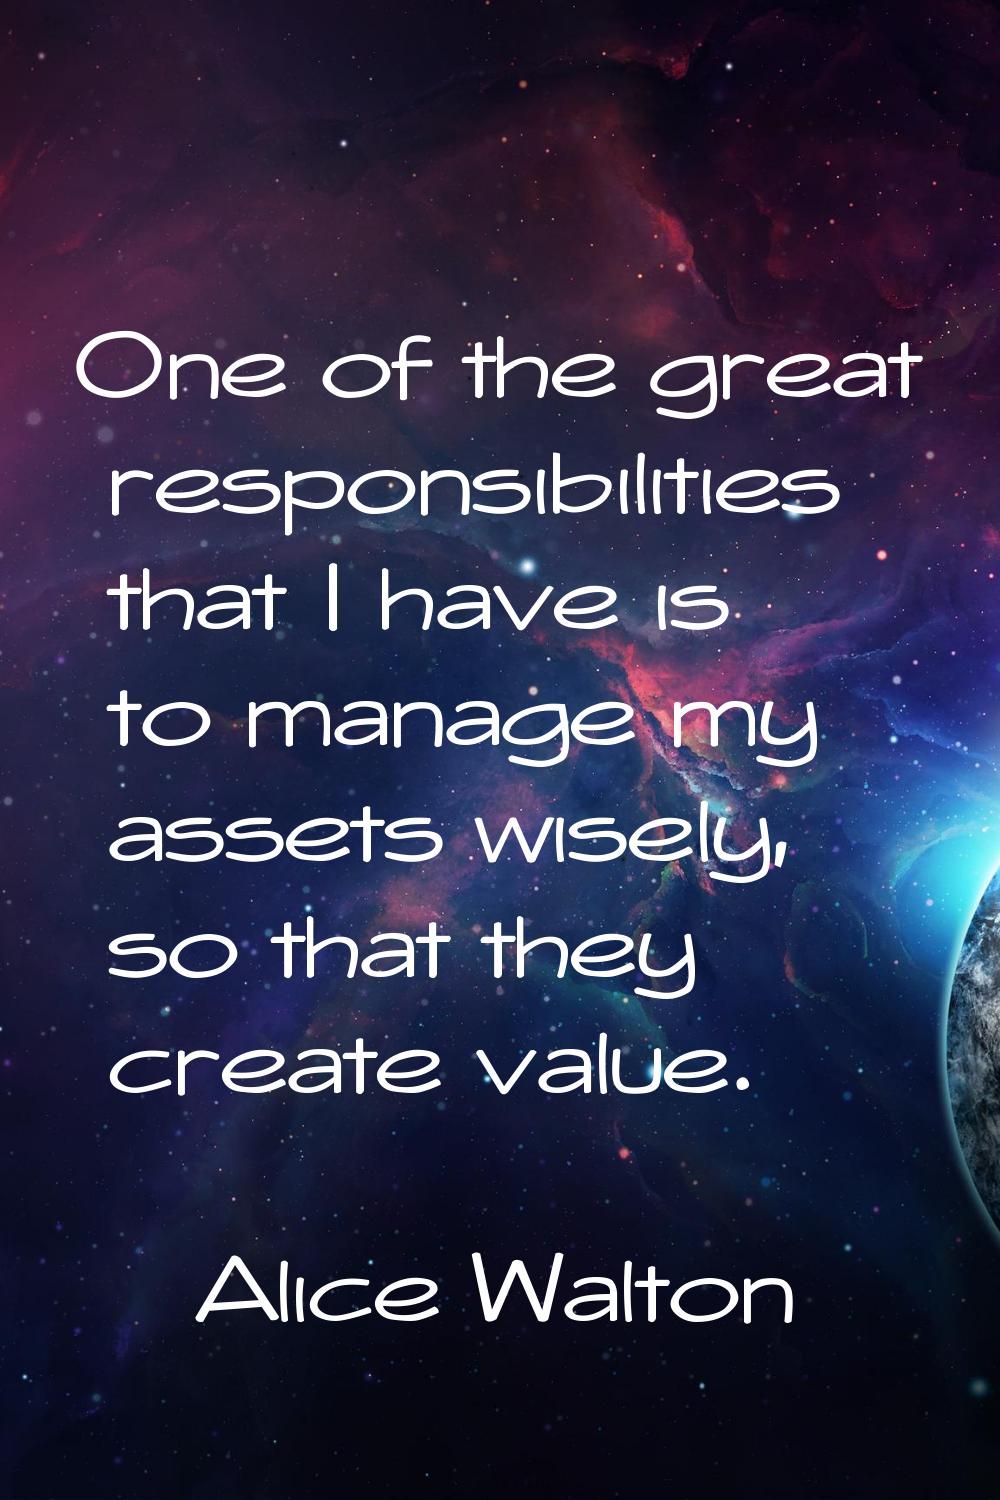 One of the great responsibilities that I have is to manage my assets wisely, so that they create va